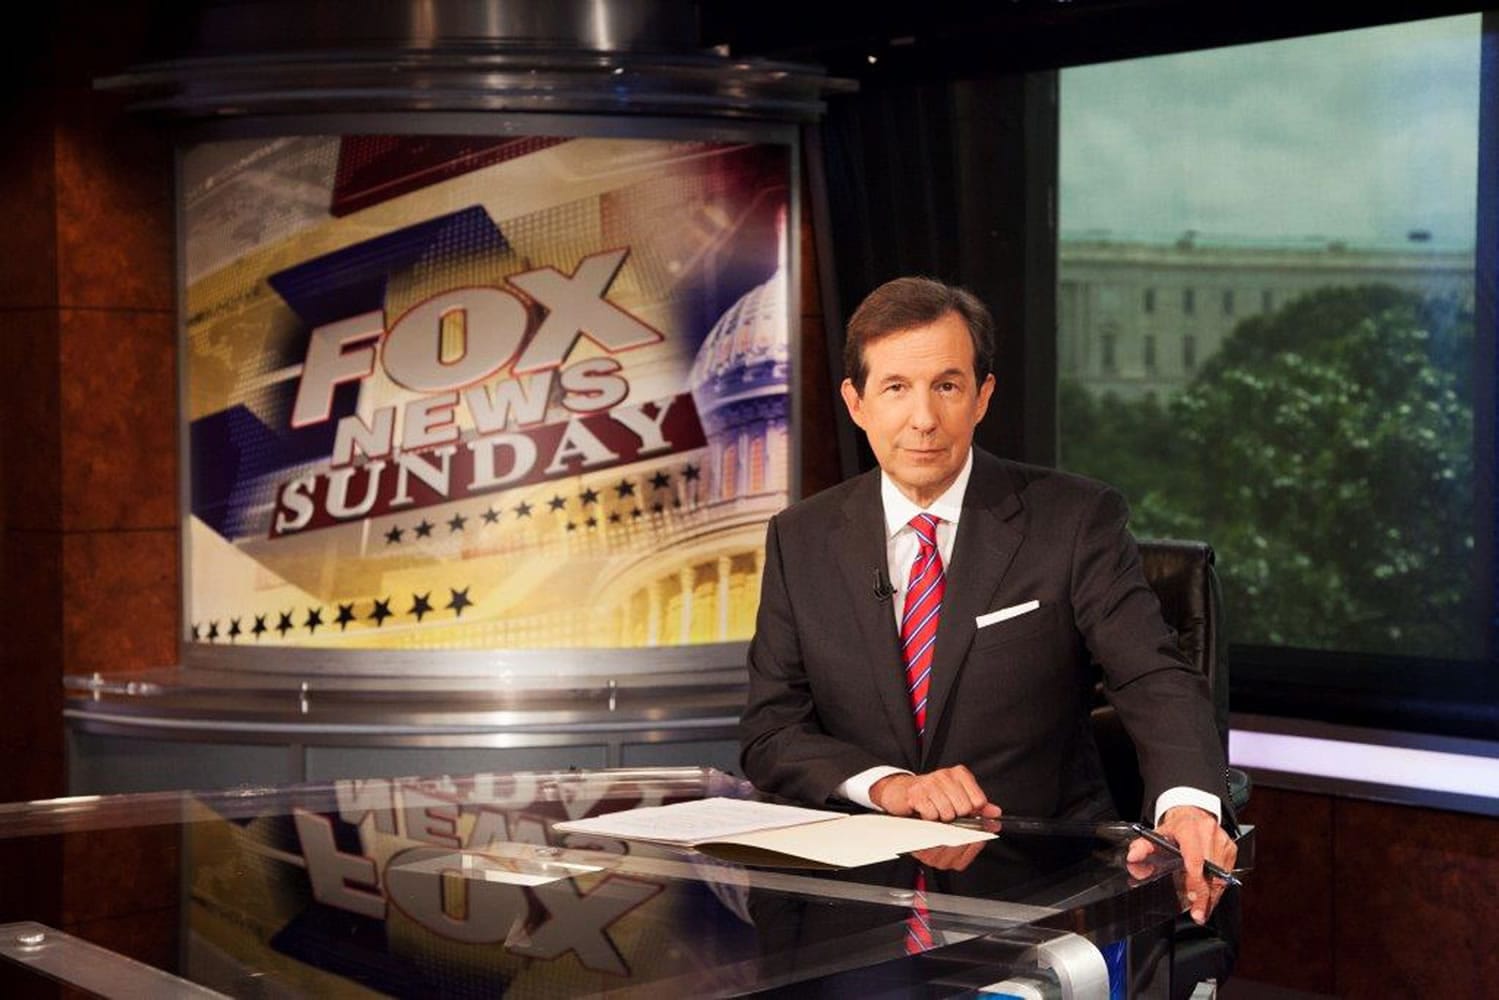 FOX News Channel
Chris Wallace marks his 10-year anniversary hosting &quot;Fox News Sunday&quot; this weekend.